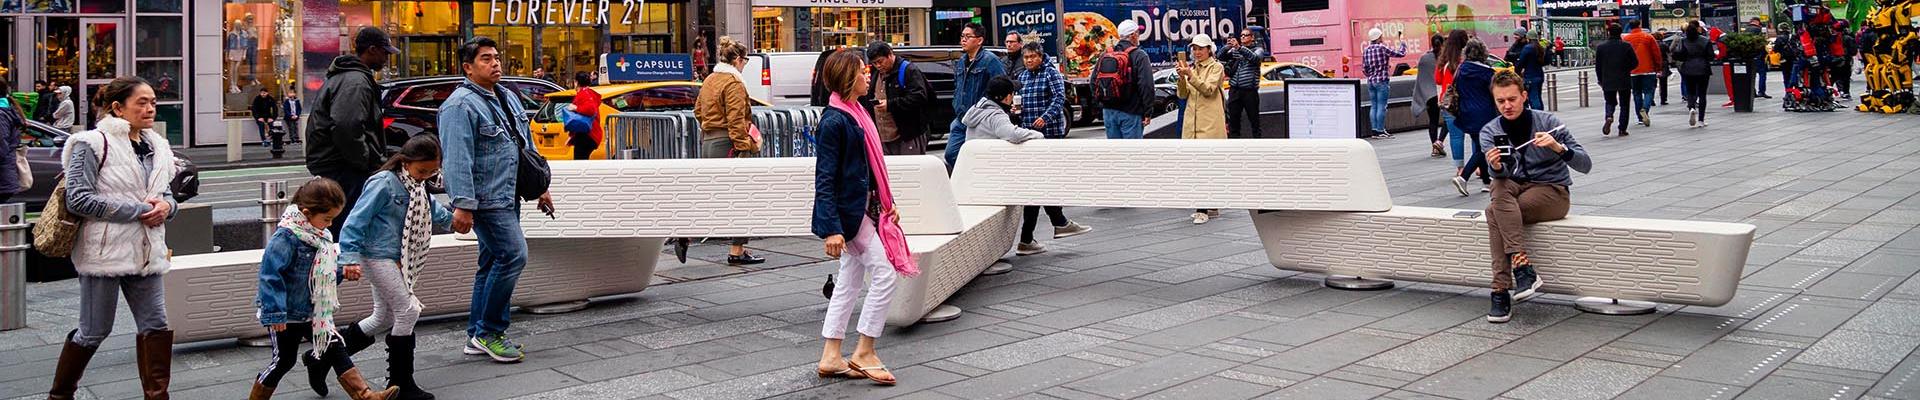 Joe Doucet installs anti-terror benches in New York's Times Square